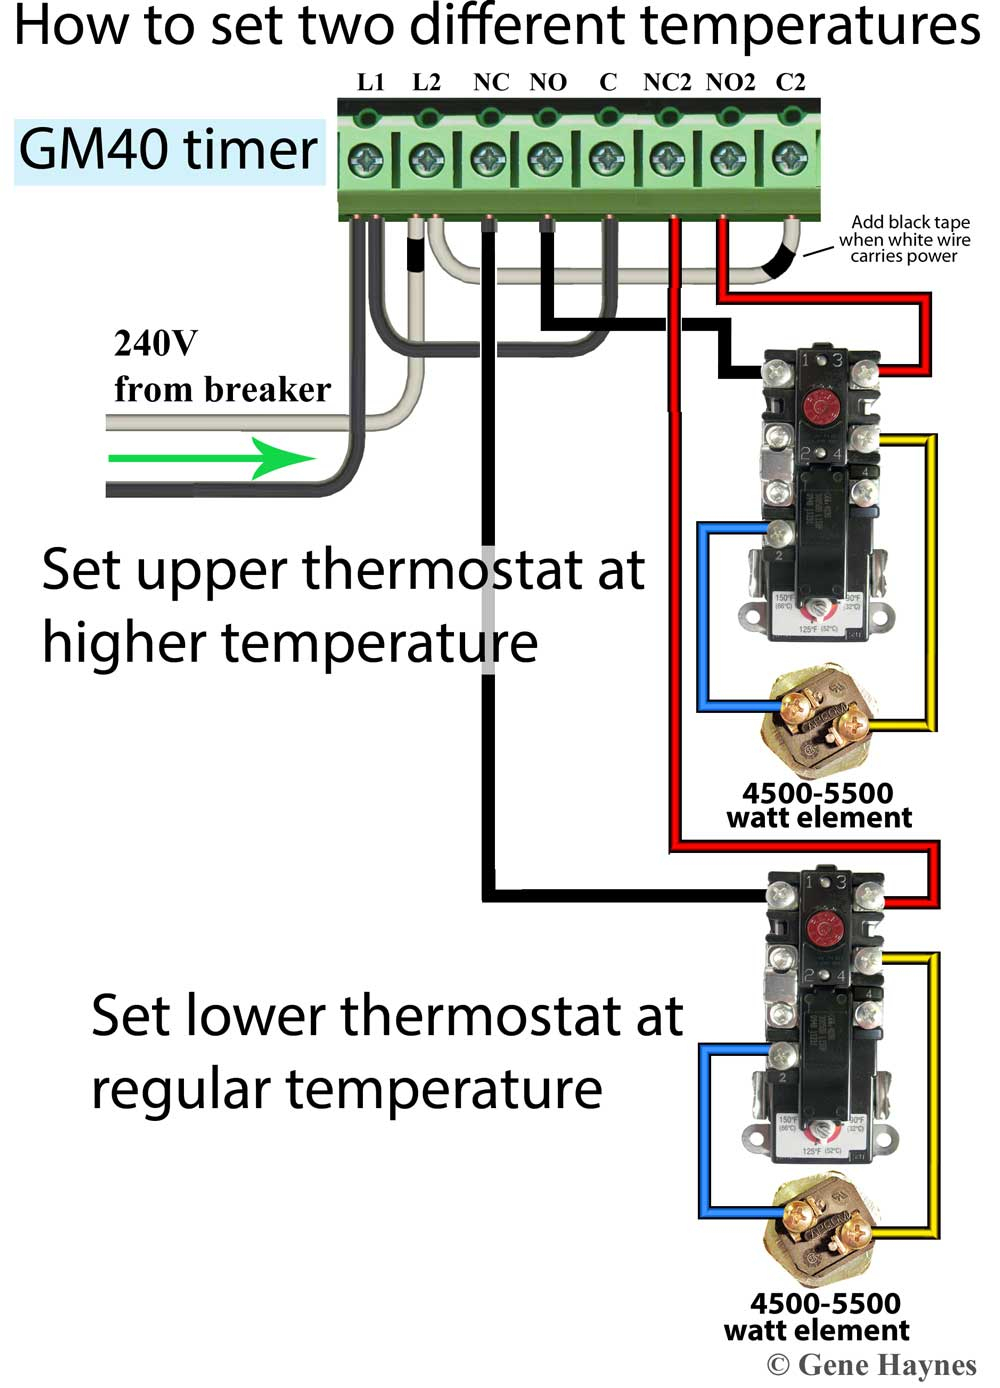 How To Wire Water Heater Thermostats - Electric Water Heater Wiring Diagram